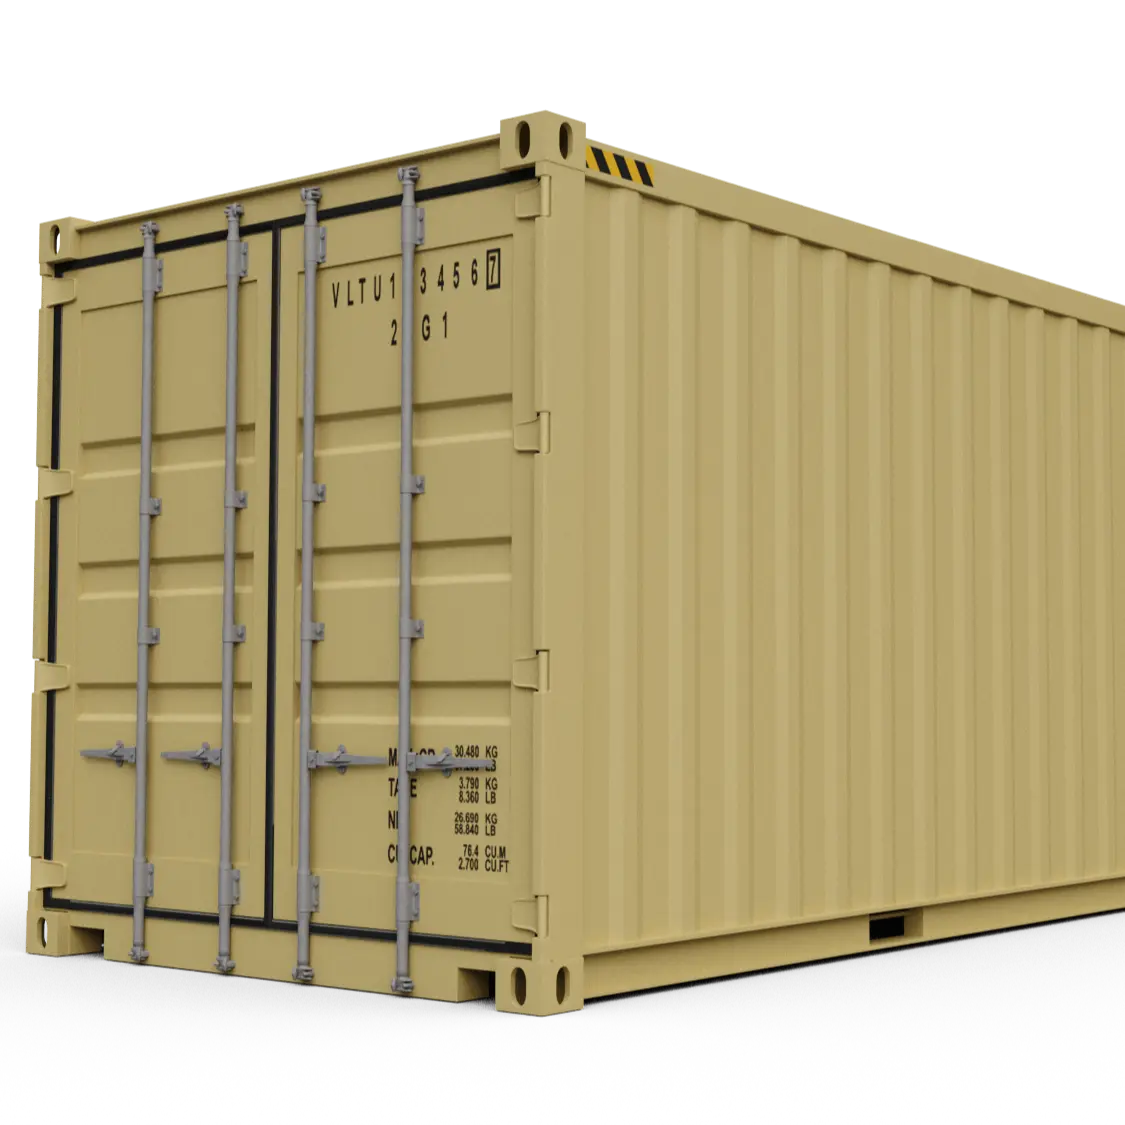 Used 40 Feet Refrigerated Containers For Sale In Qingdao China